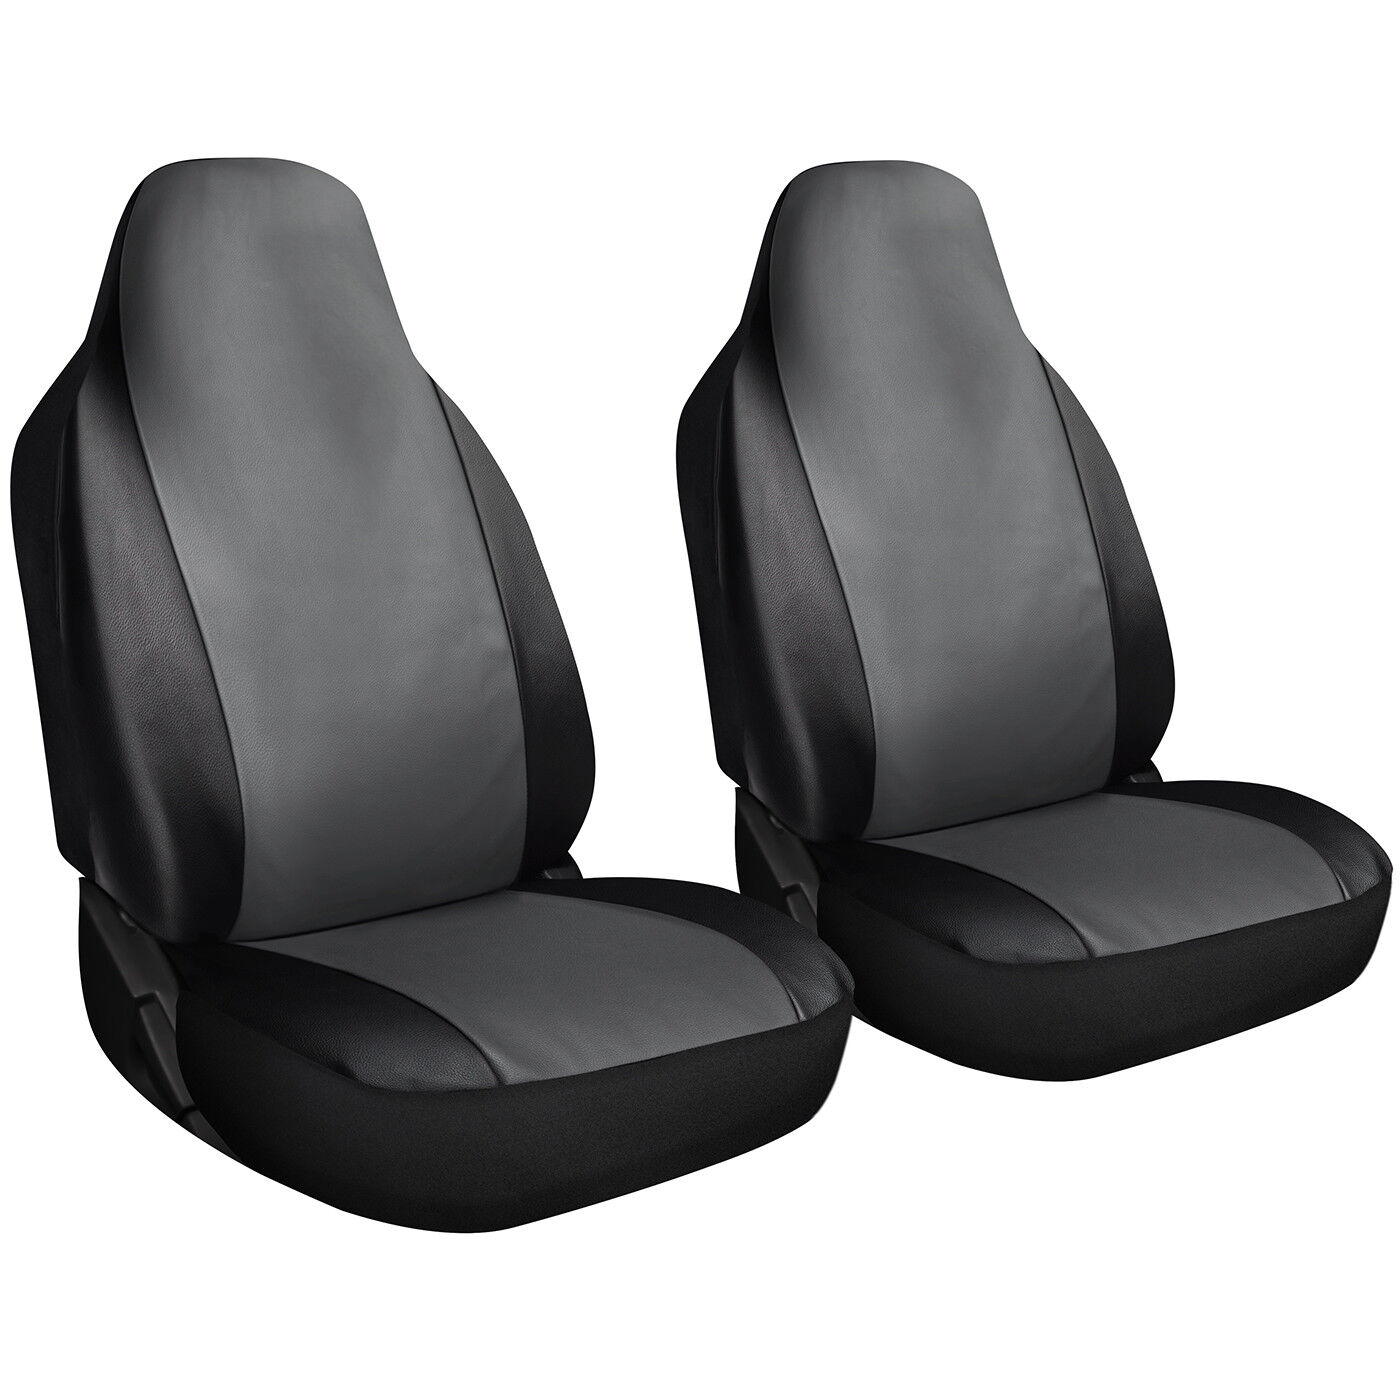 Seat Cover Set Front Integrated Bucket for Car Truck SUV - 2pc Gray & Black